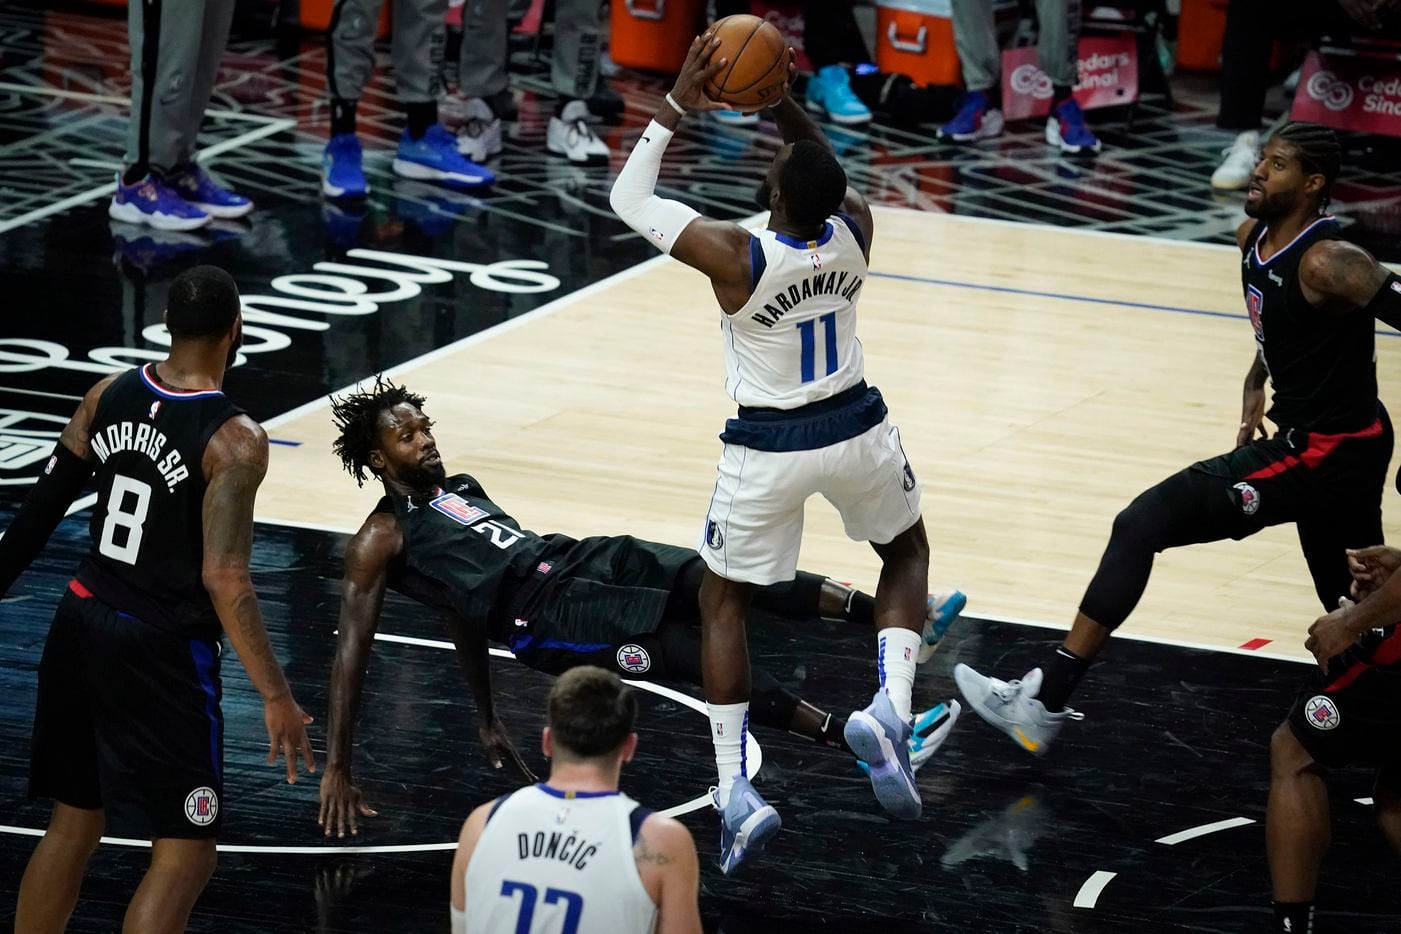 LA Clippers guard Patrick Beverley (21) falls to the ground as he picks up a foul on a drive by Dallas Mavericks forward Tim Hardaway Jr. (11) during the second half of an NBA playoff basketball game at Staples Center on Tuesday, May 25, 2021, in Los Angeles.